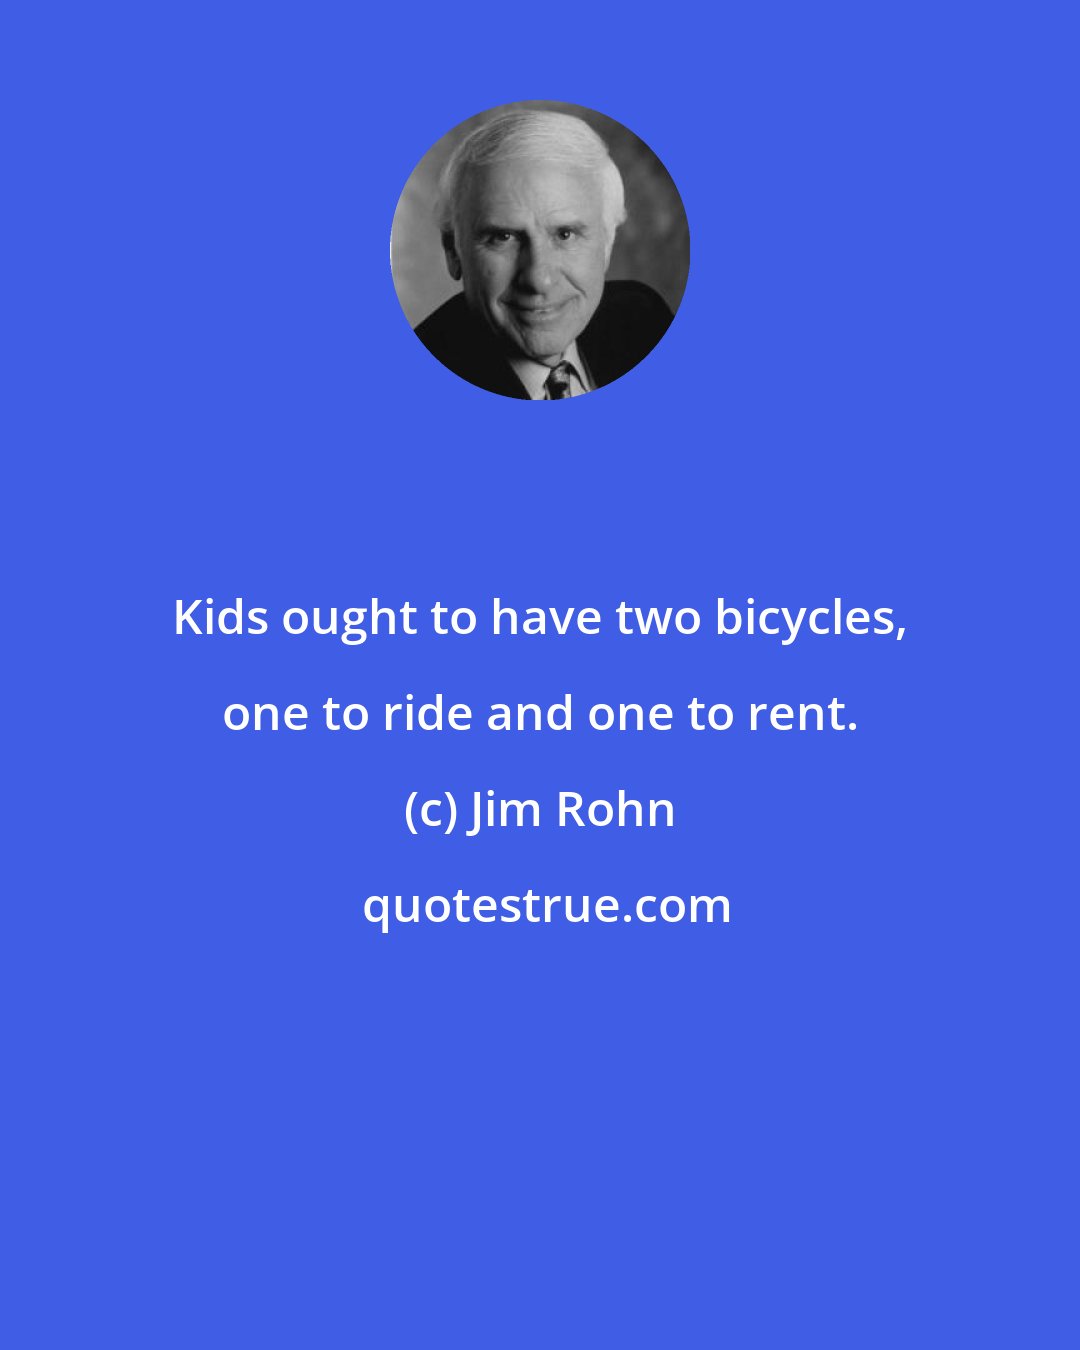 Jim Rohn: Kids ought to have two bicycles, one to ride and one to rent.